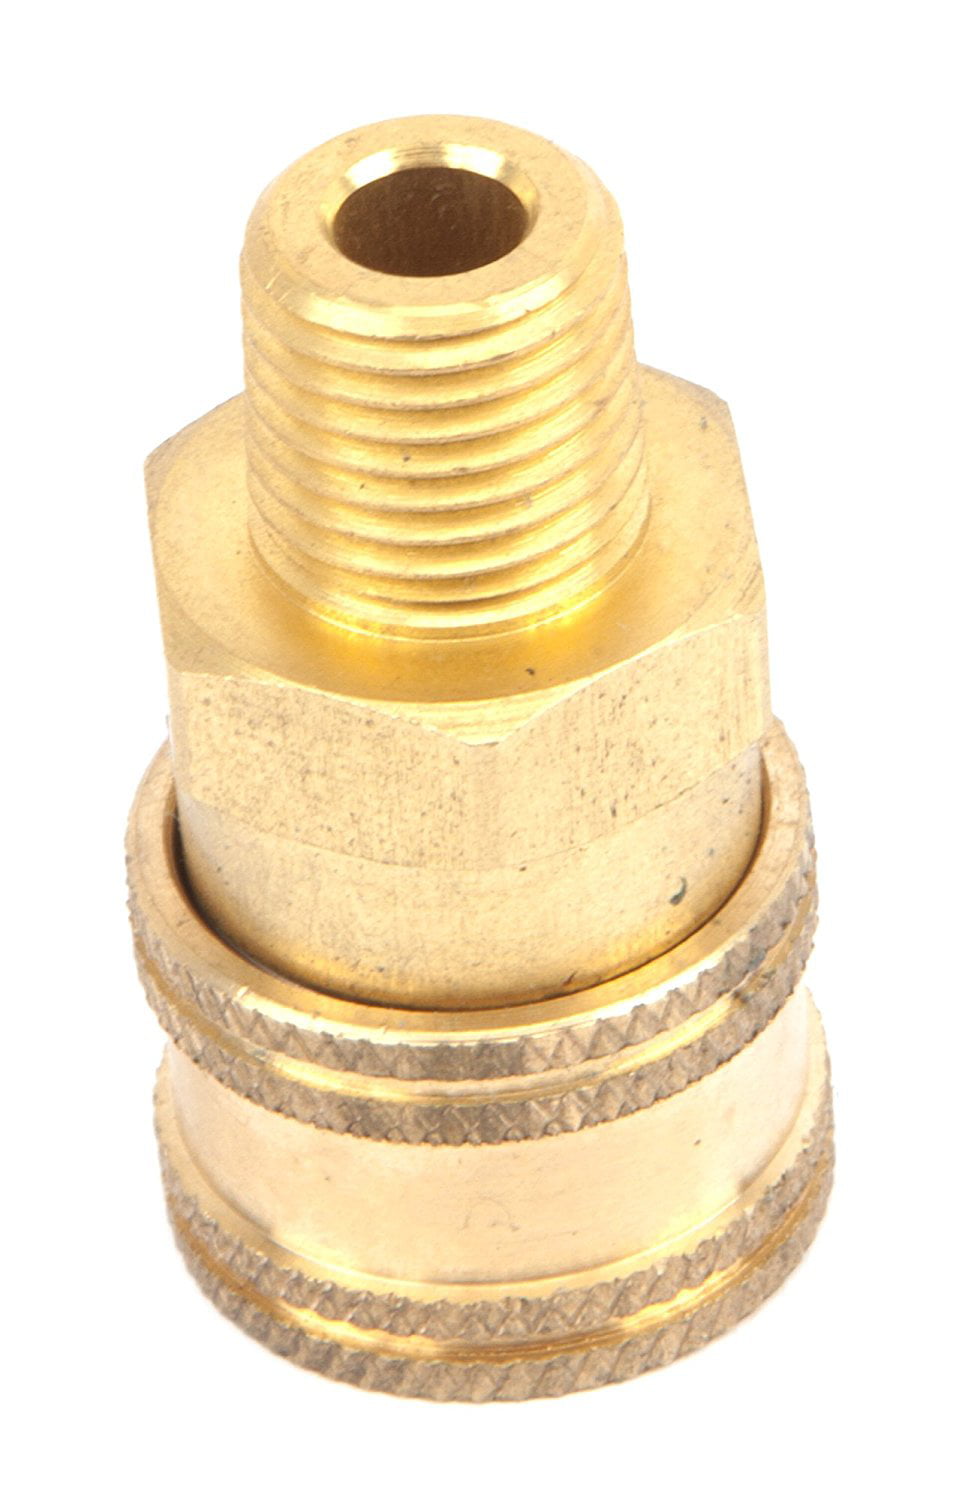 Pressure Washer Stainless Quick Connect Plug 1/4" Male Pipe Thread 5500psi New 